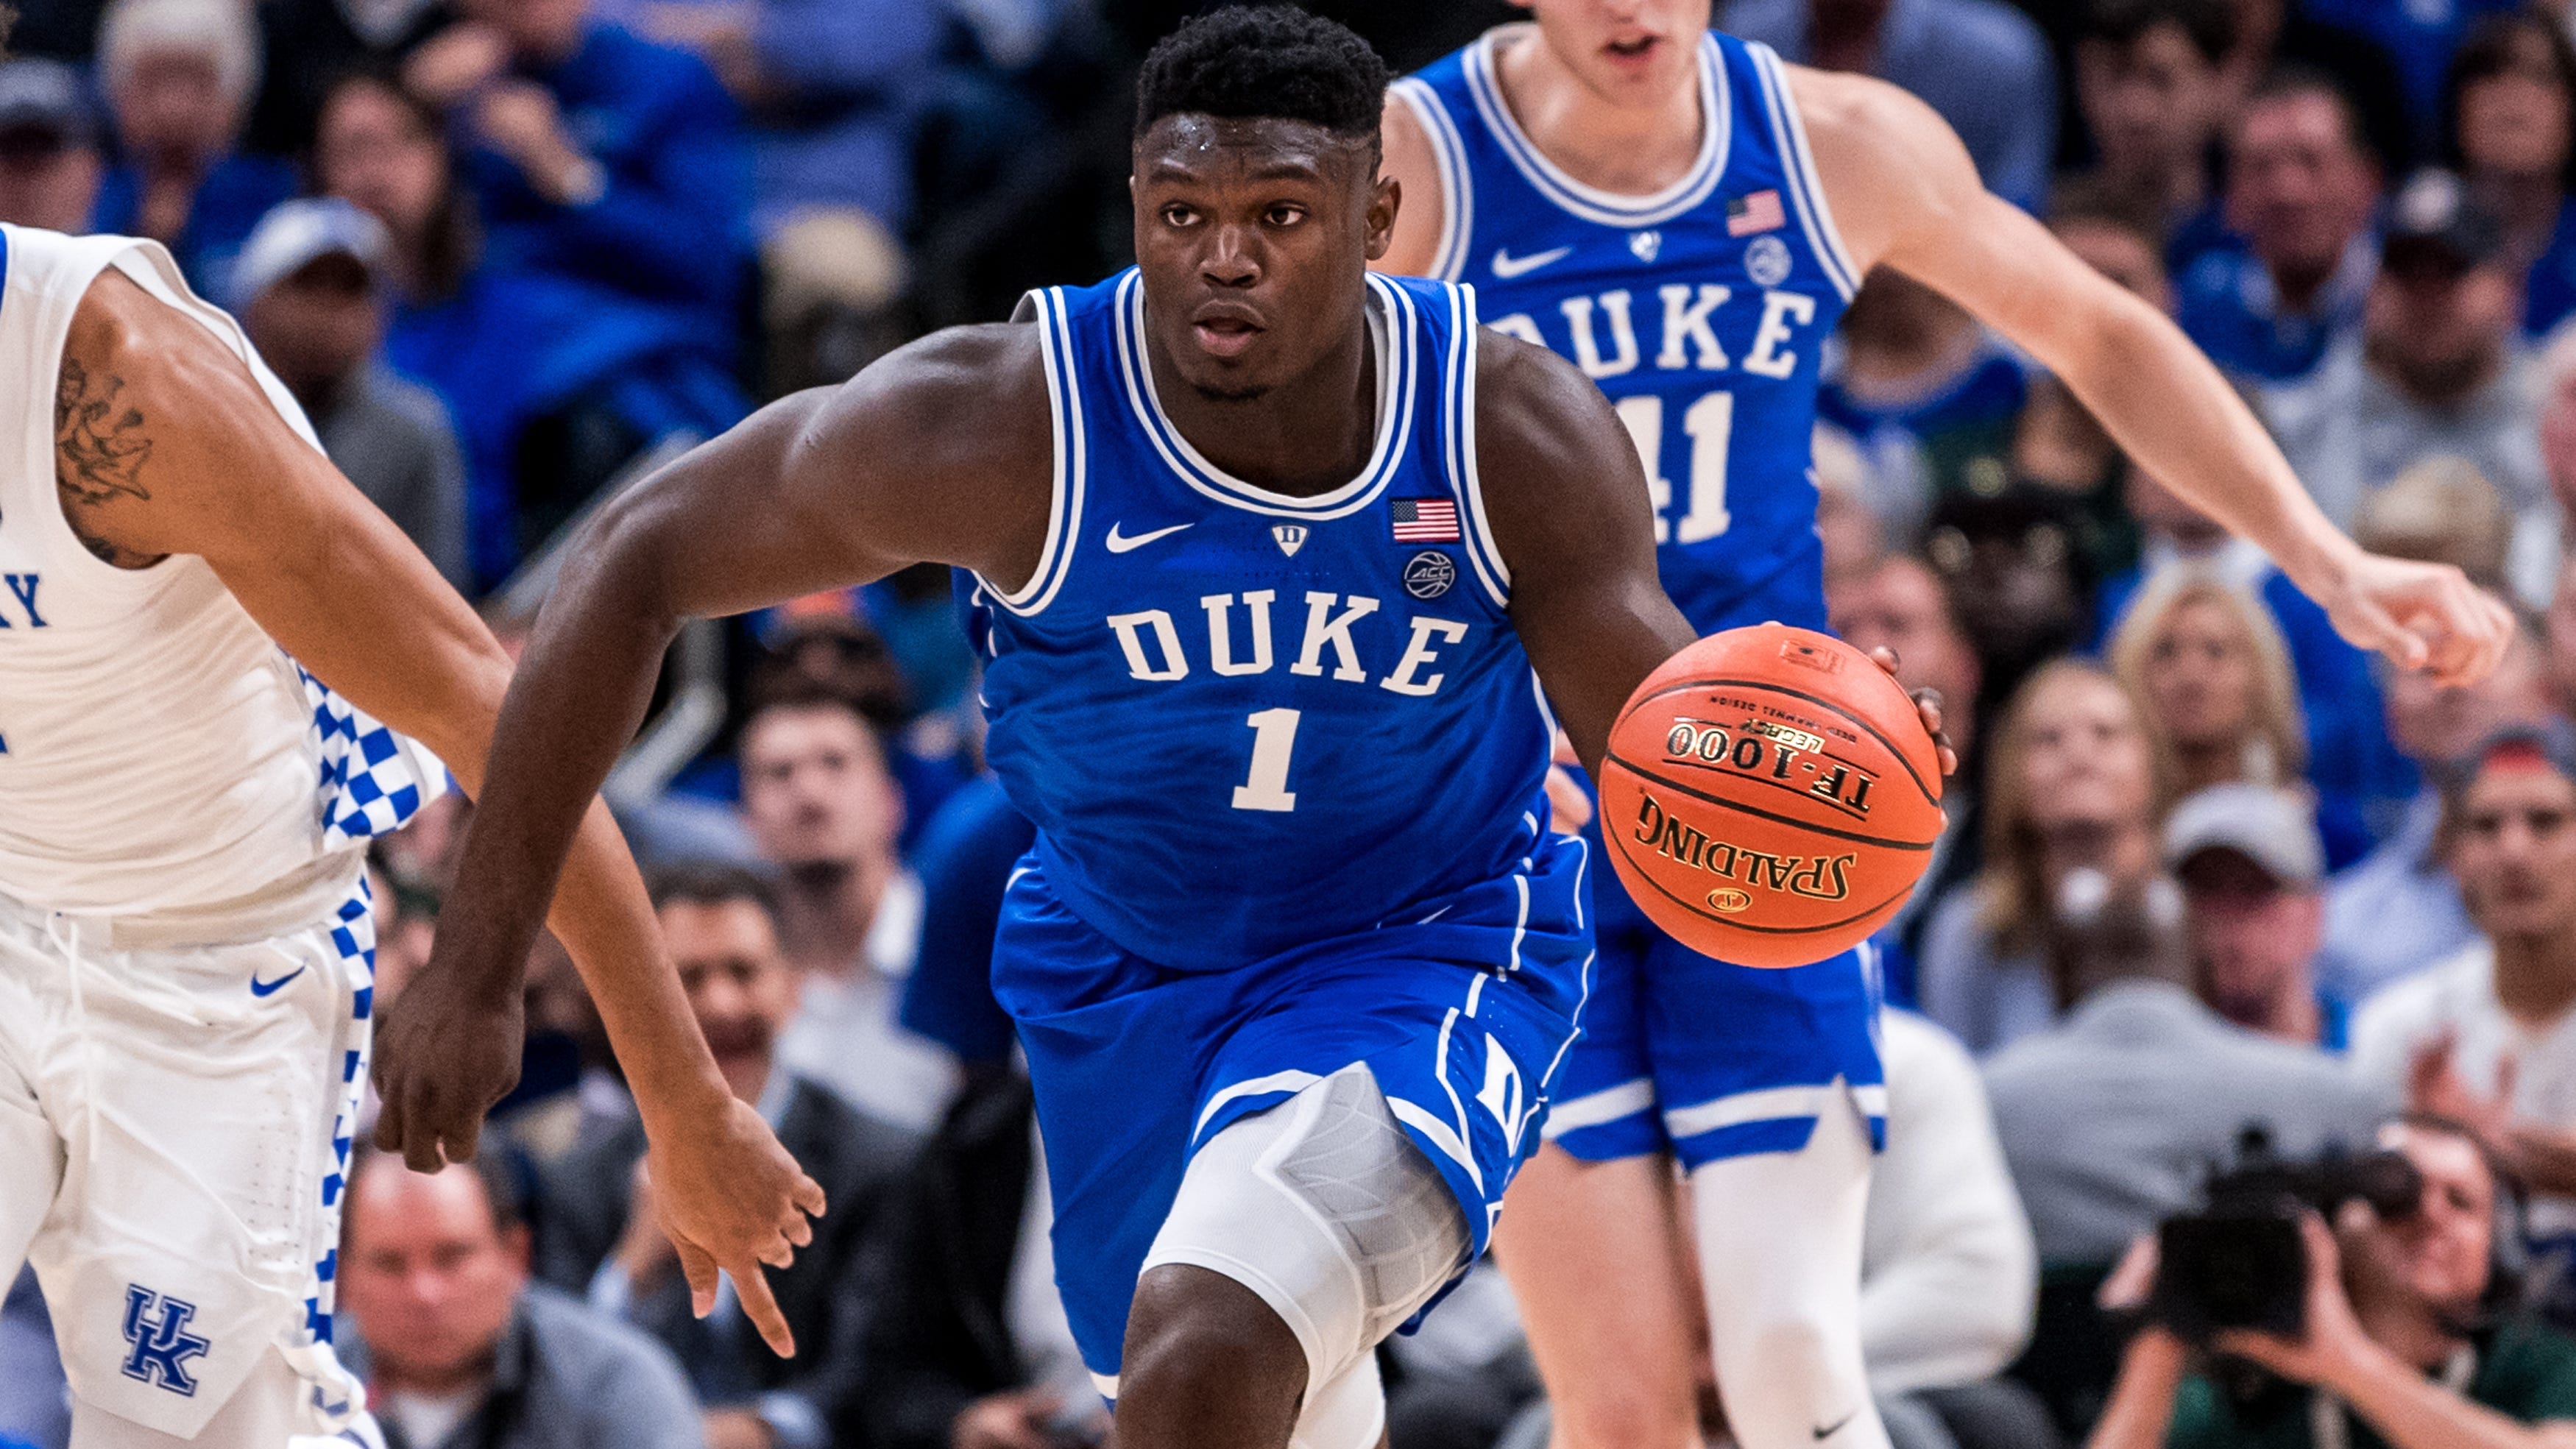 Zion Williamson may have started a new trend in the Duke